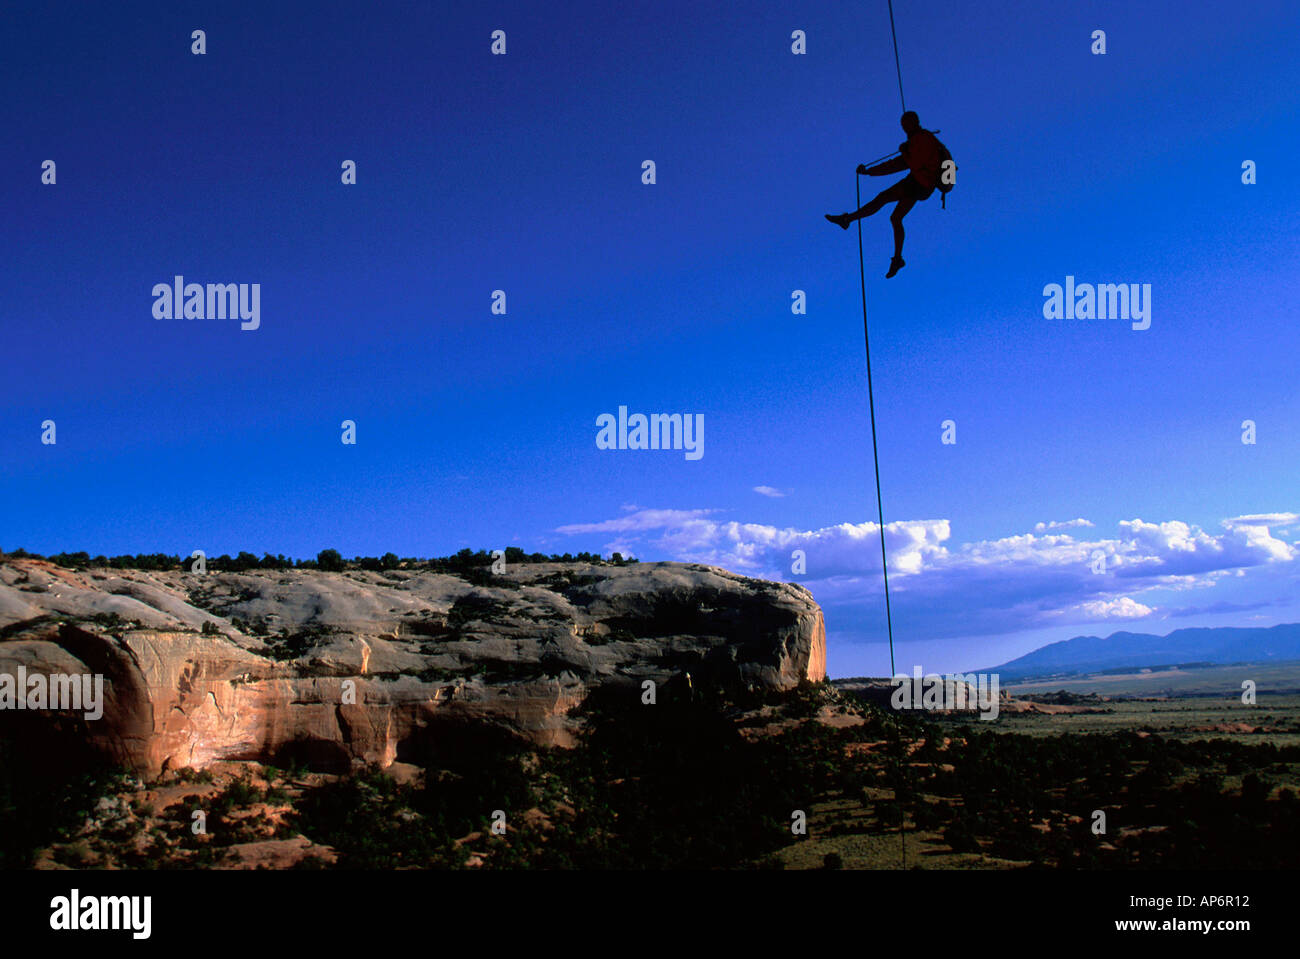 Man abseiling on rope in landscape of in Fisher Towers, Colorado River Waterway Near Castle Valley, Moab, Utah, USA Stock Photo